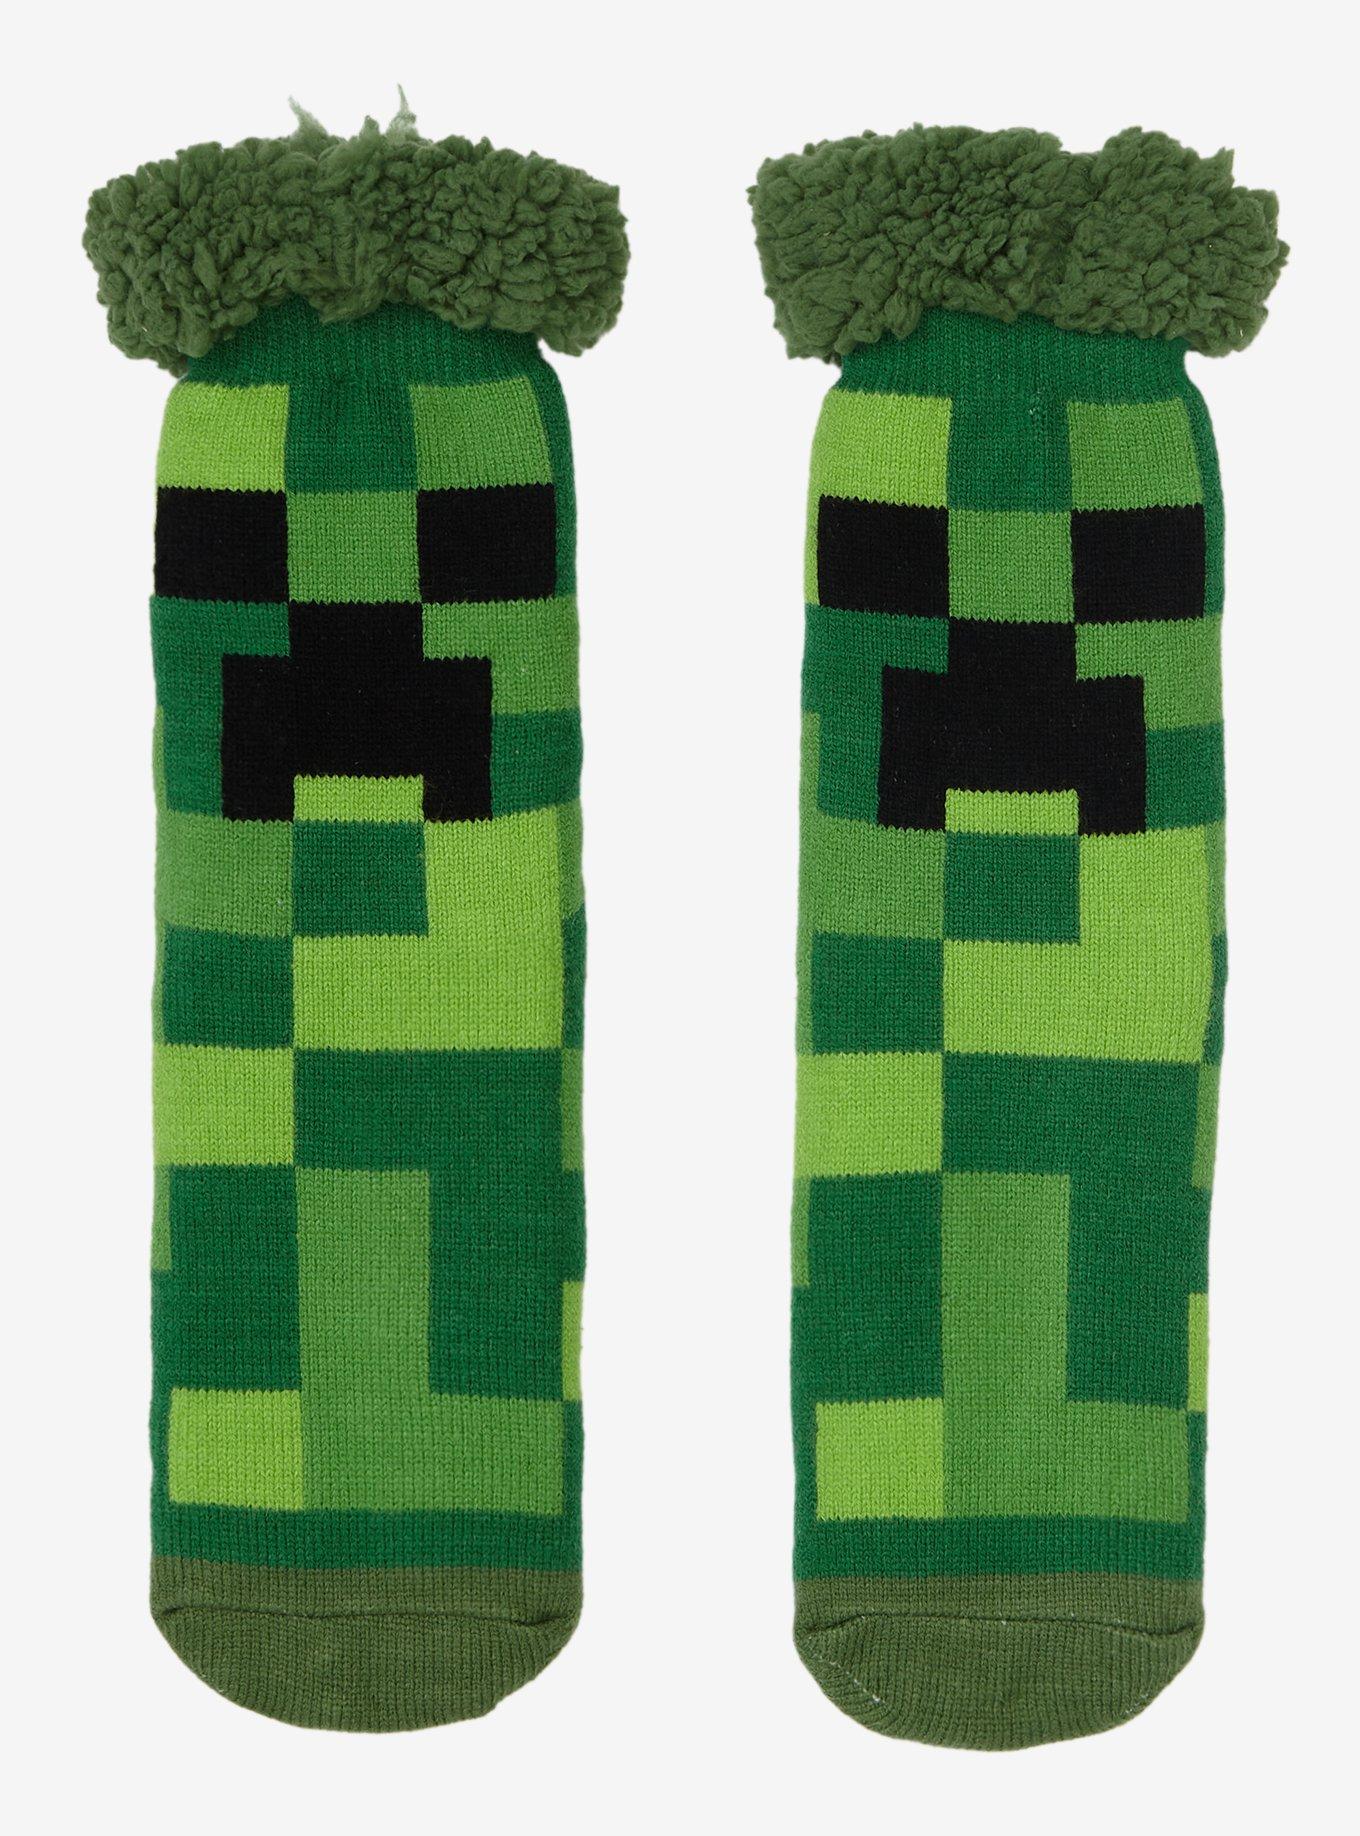 Pixelated For Boys Minecrafter Tumbler, Pixelated For Boys Minecrafter  Skinny Tumbler